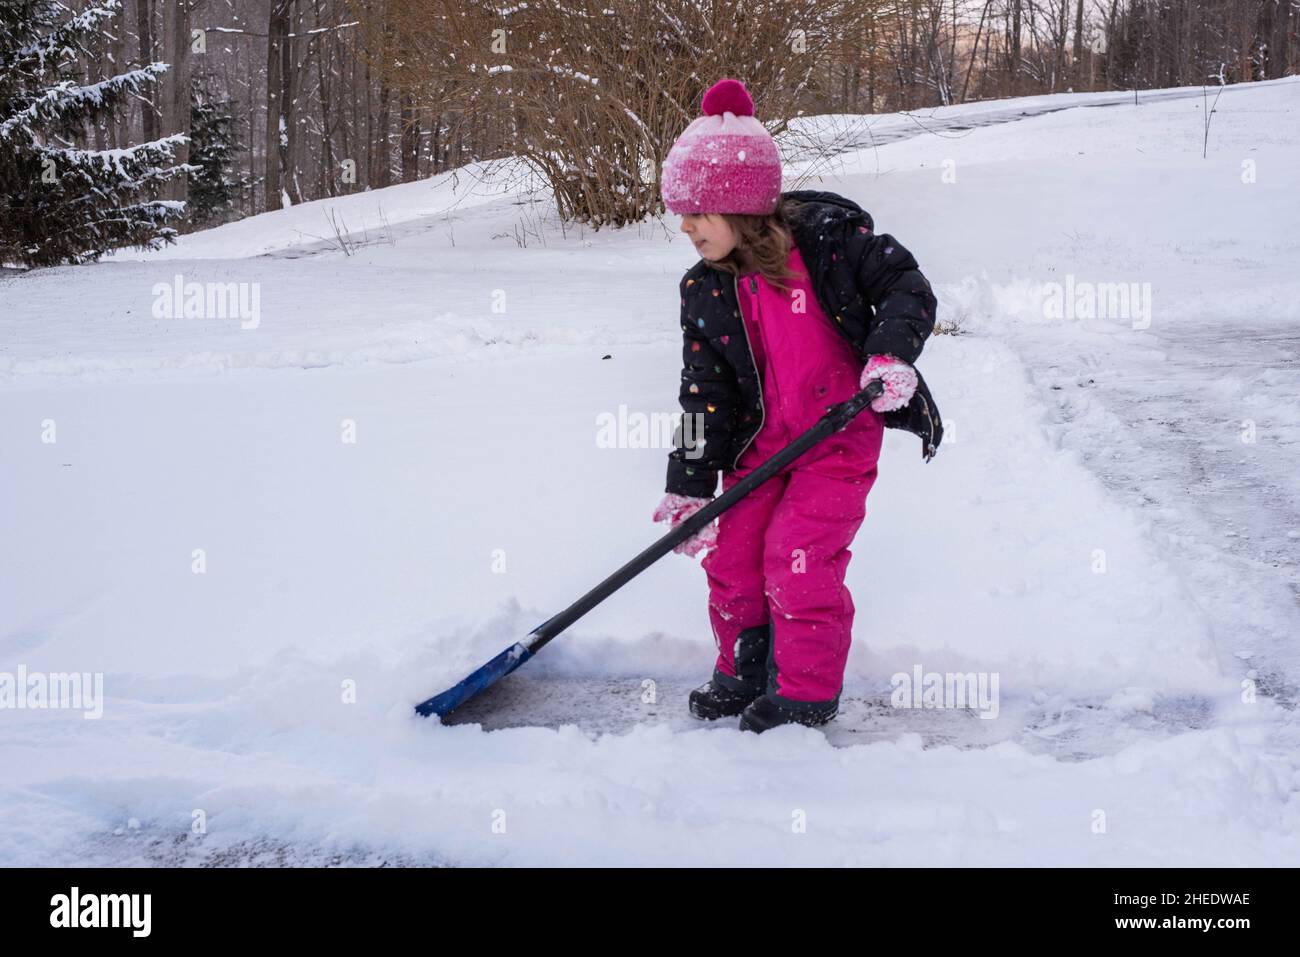 A young girl shovels snow in a driveway during winter in a pink snow suit and black winter jacket with colorful circles on it. Stock Photo